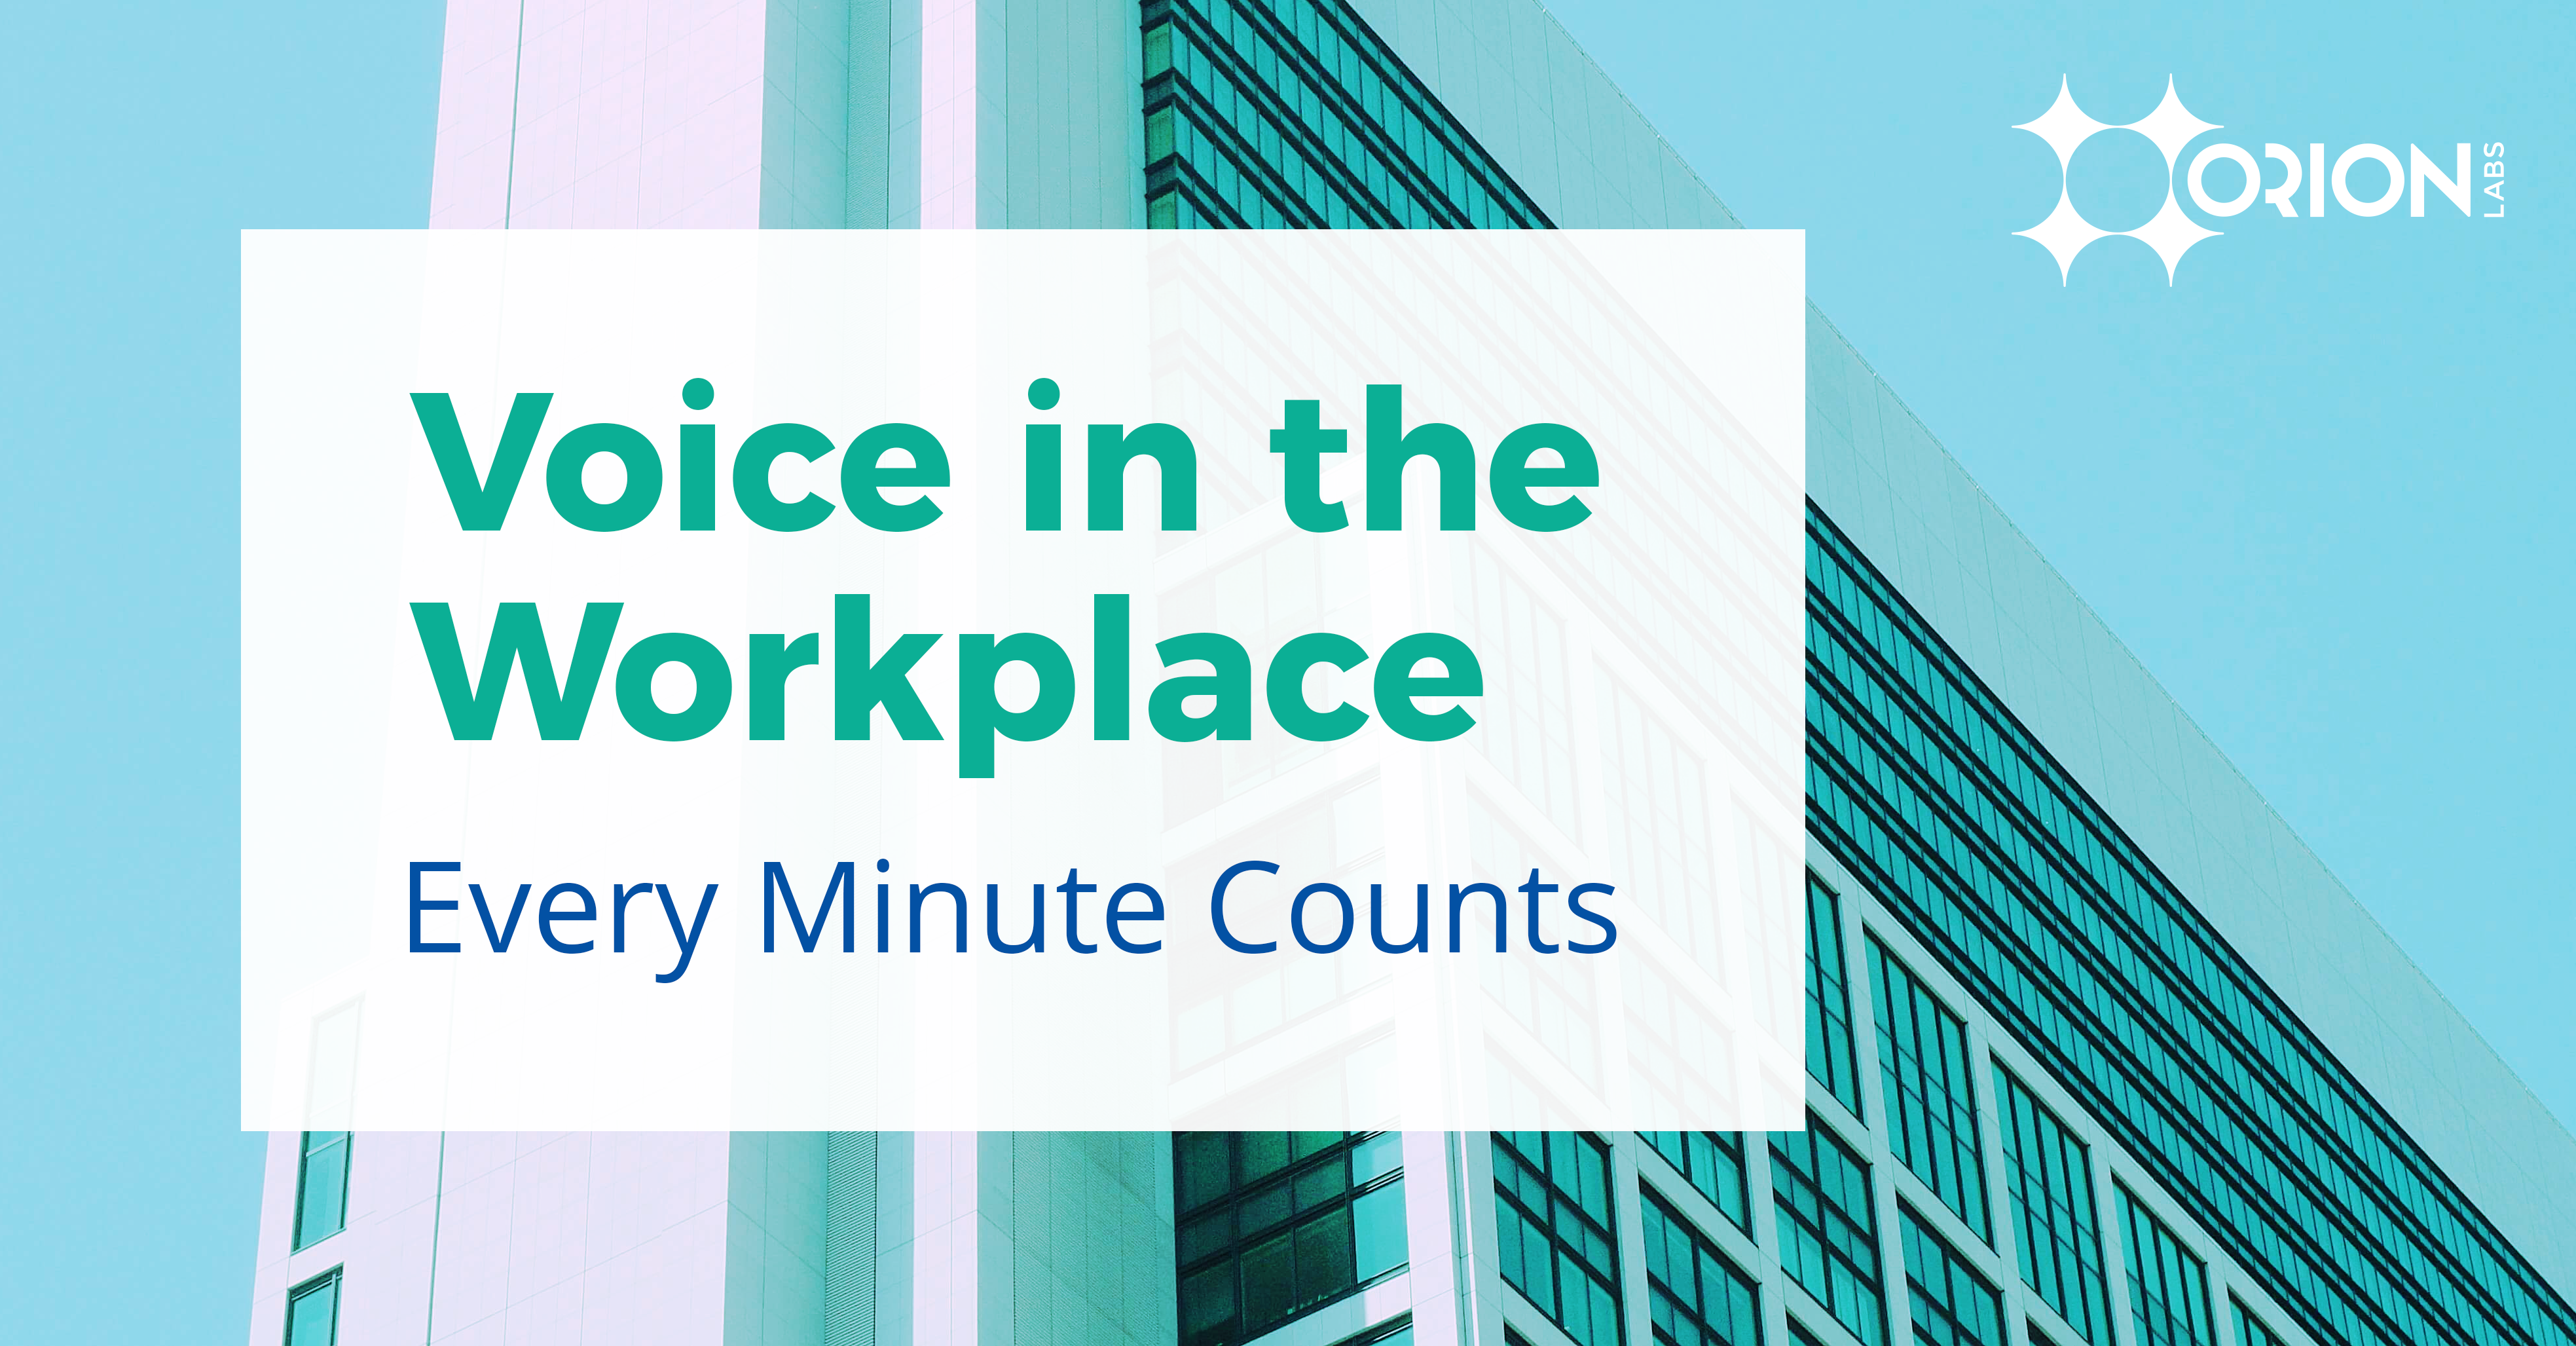 Voice in the Workplace - How businesses are using voice solutions